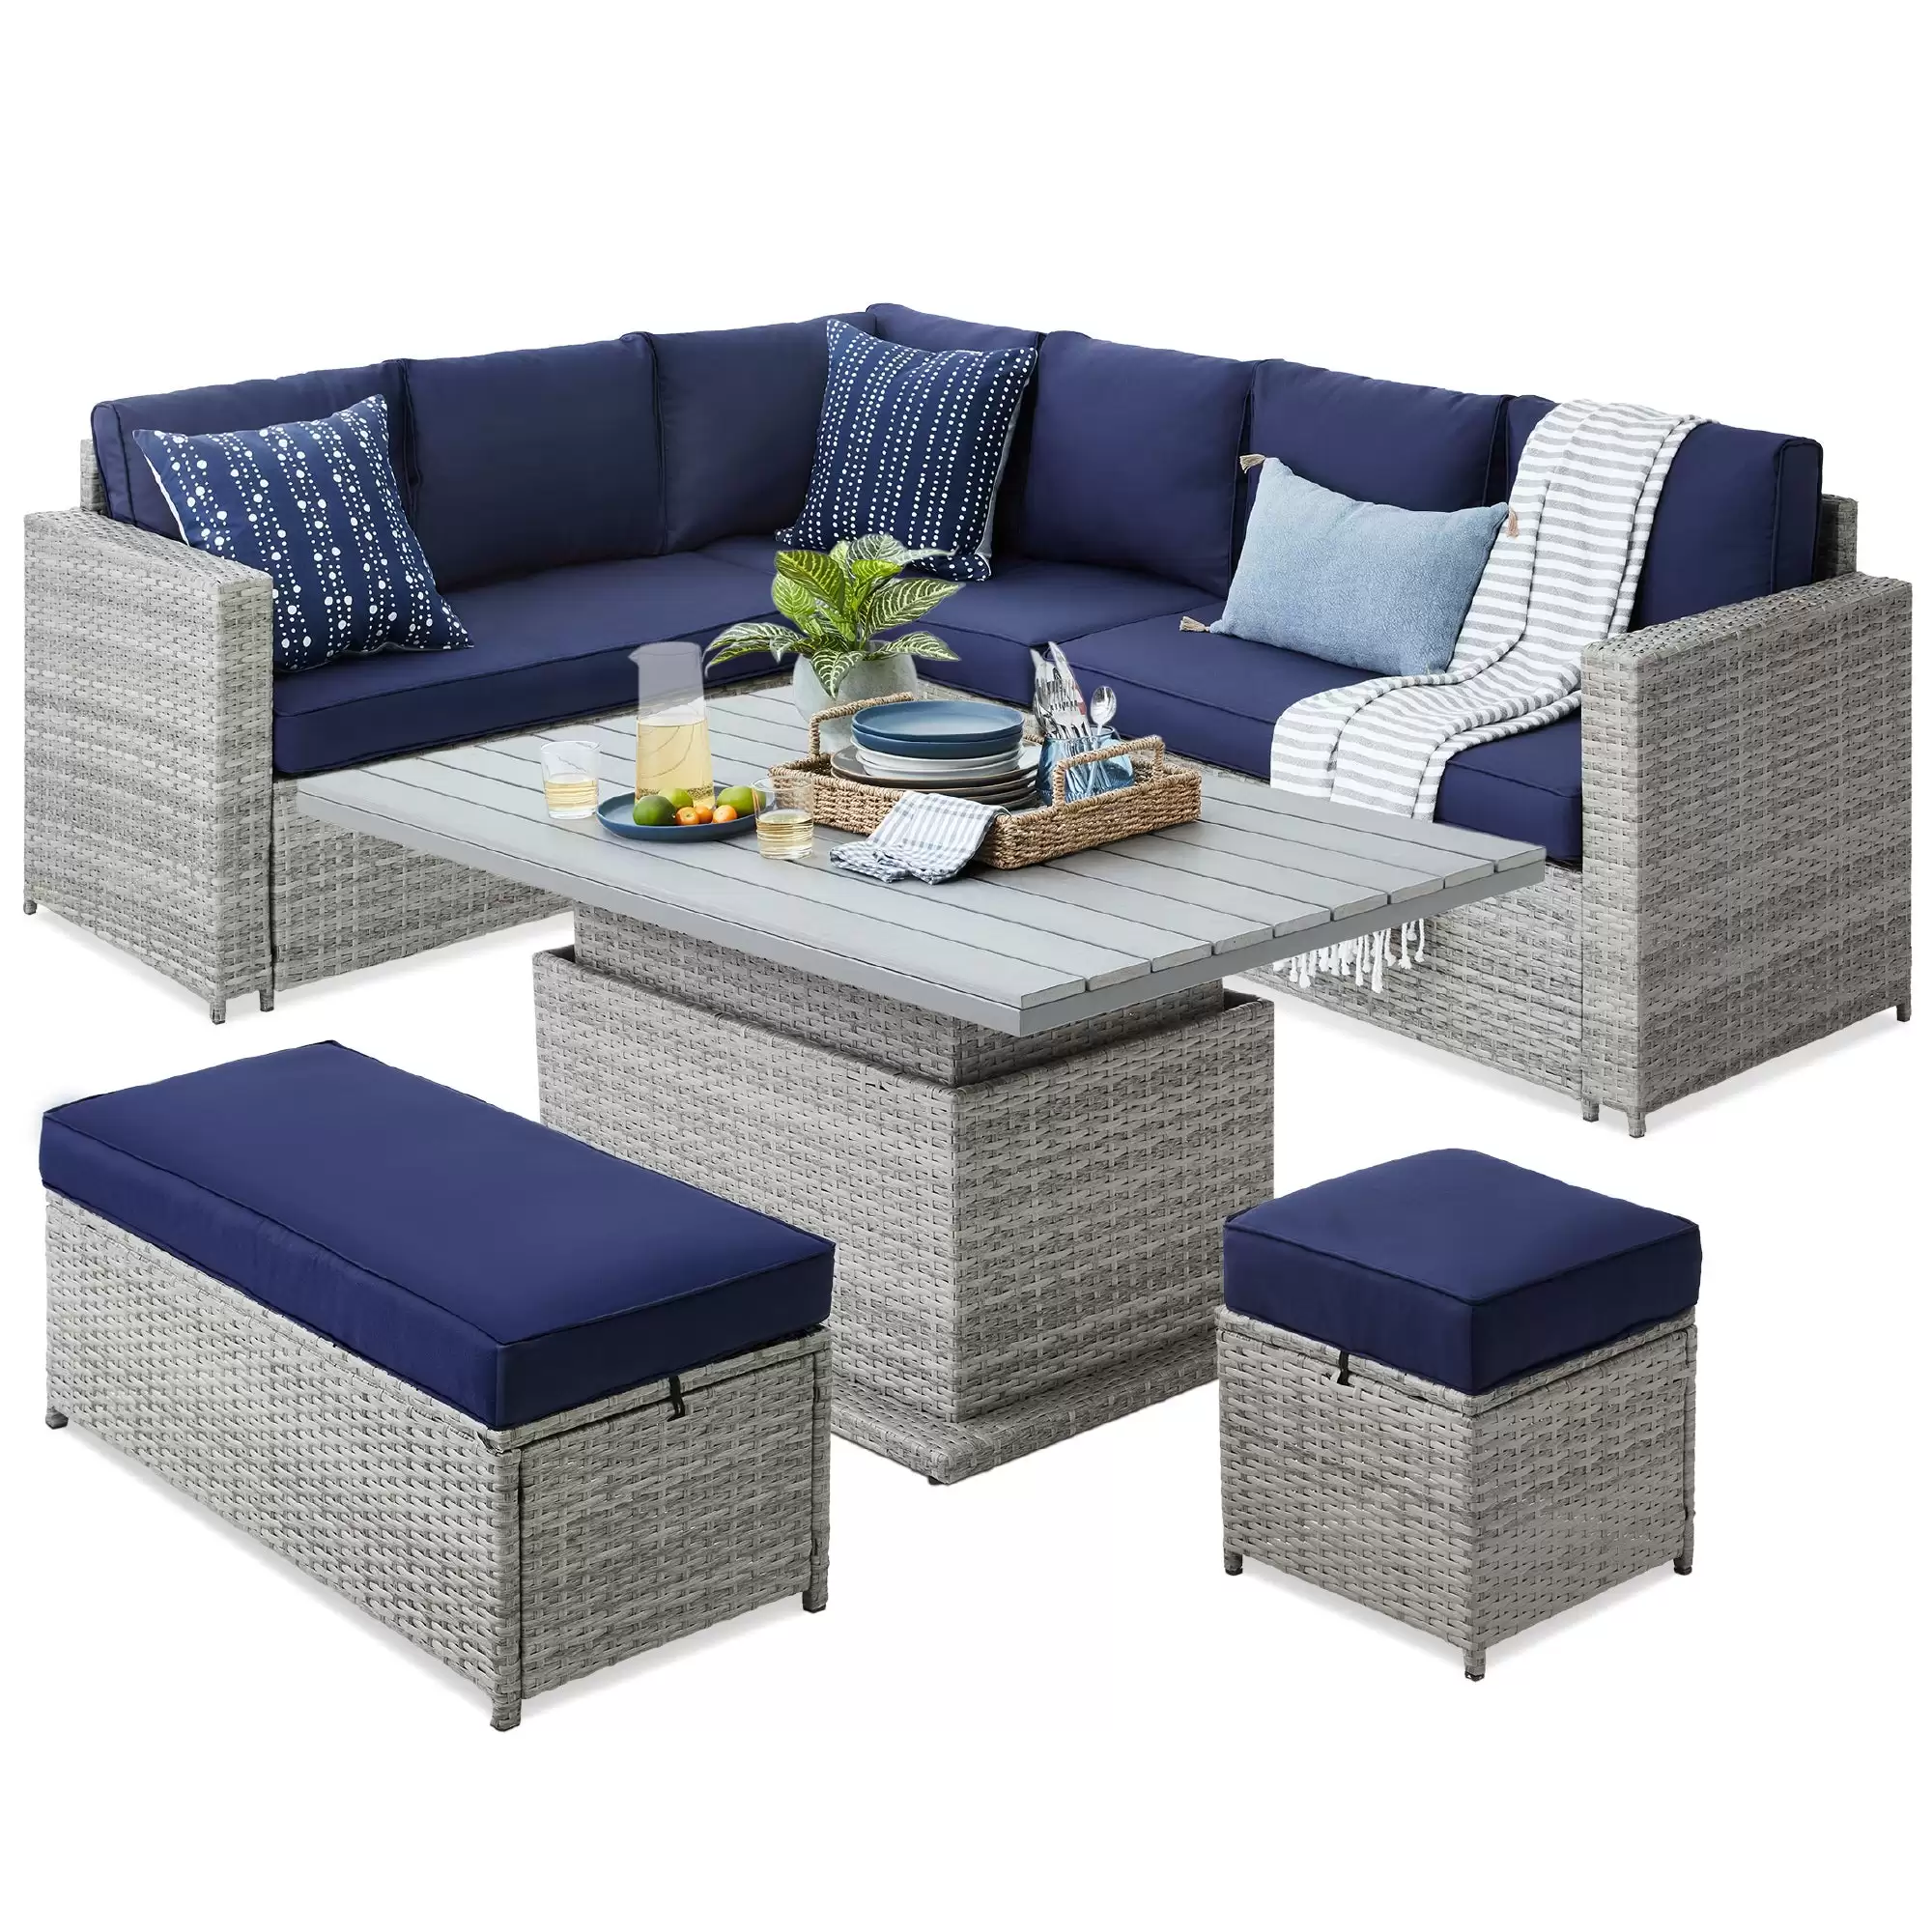 Spend $749.99 6-Piece Wicker Patio Furniture Set W/ Height-Adjustable Dining Table At Bestchoiceproducts